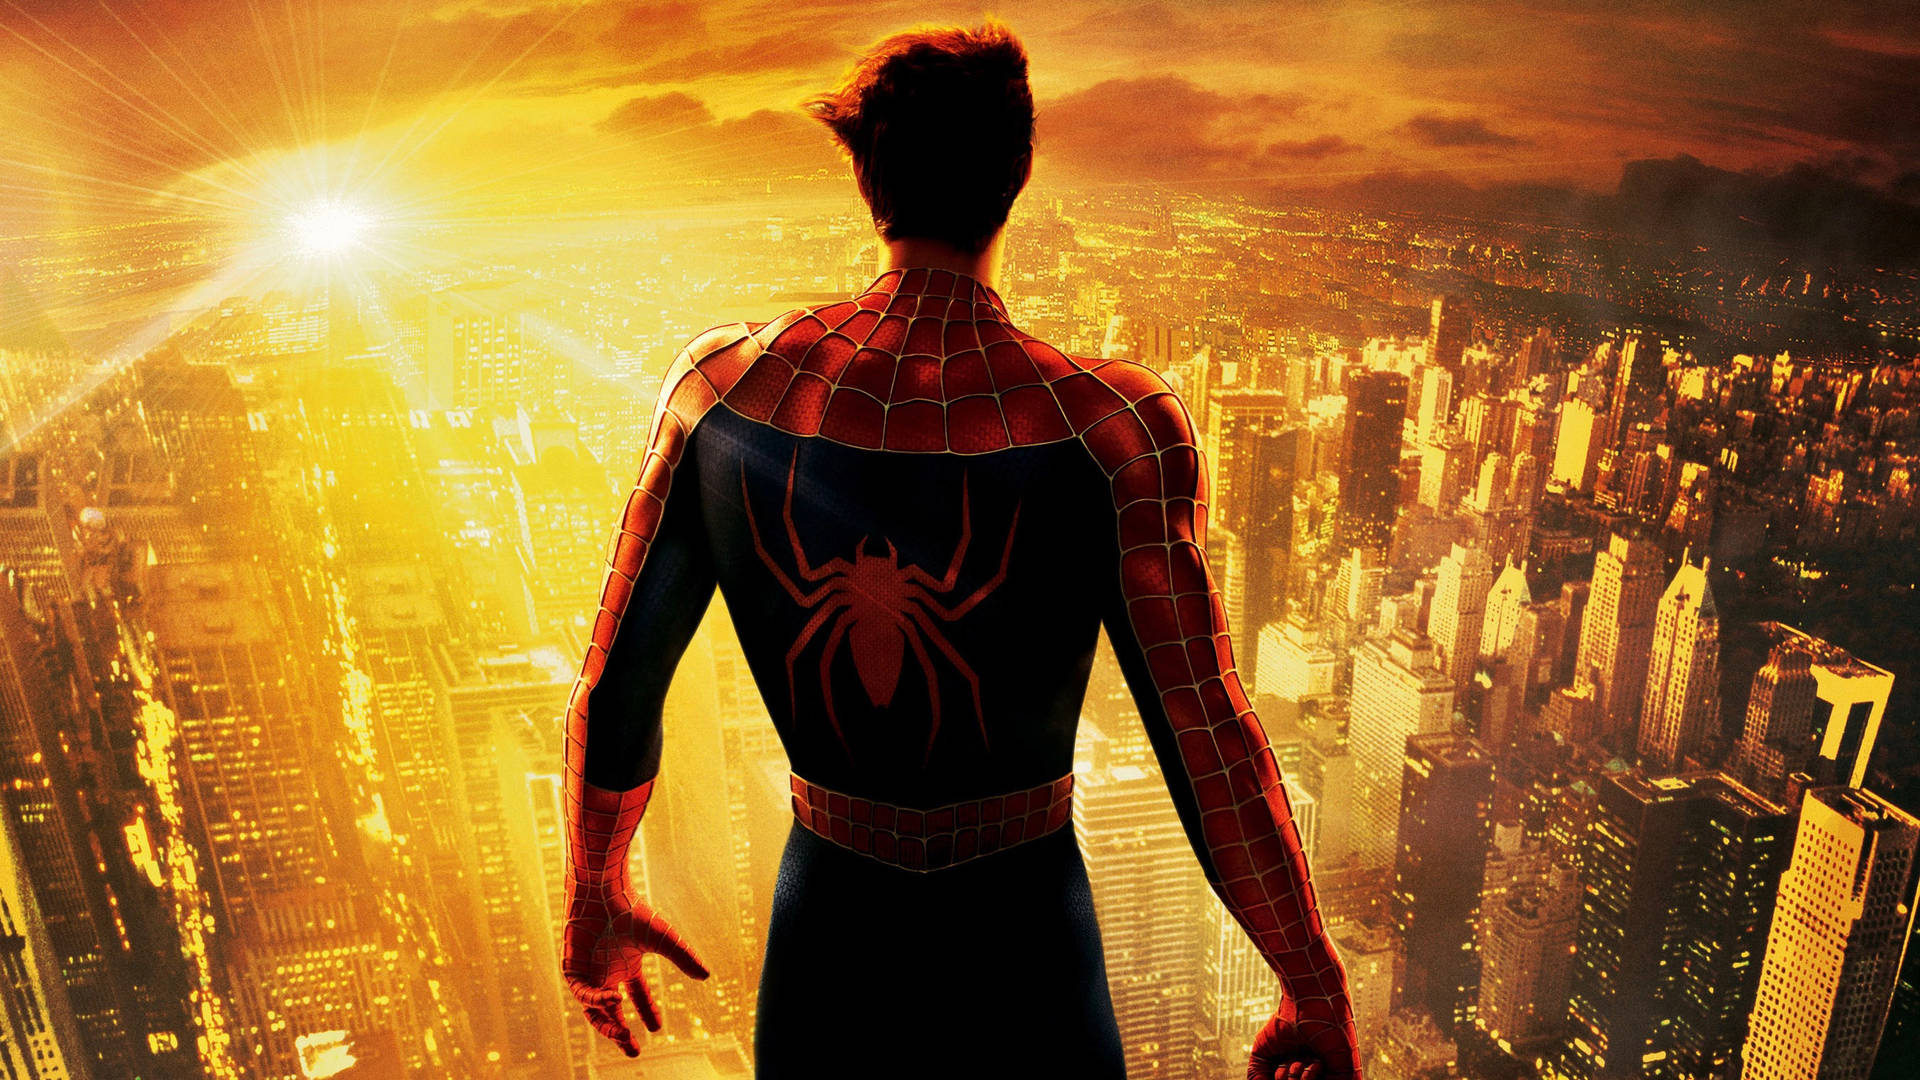 Get ready to swing into action with The Amazing Spider-Man! Wallpaper